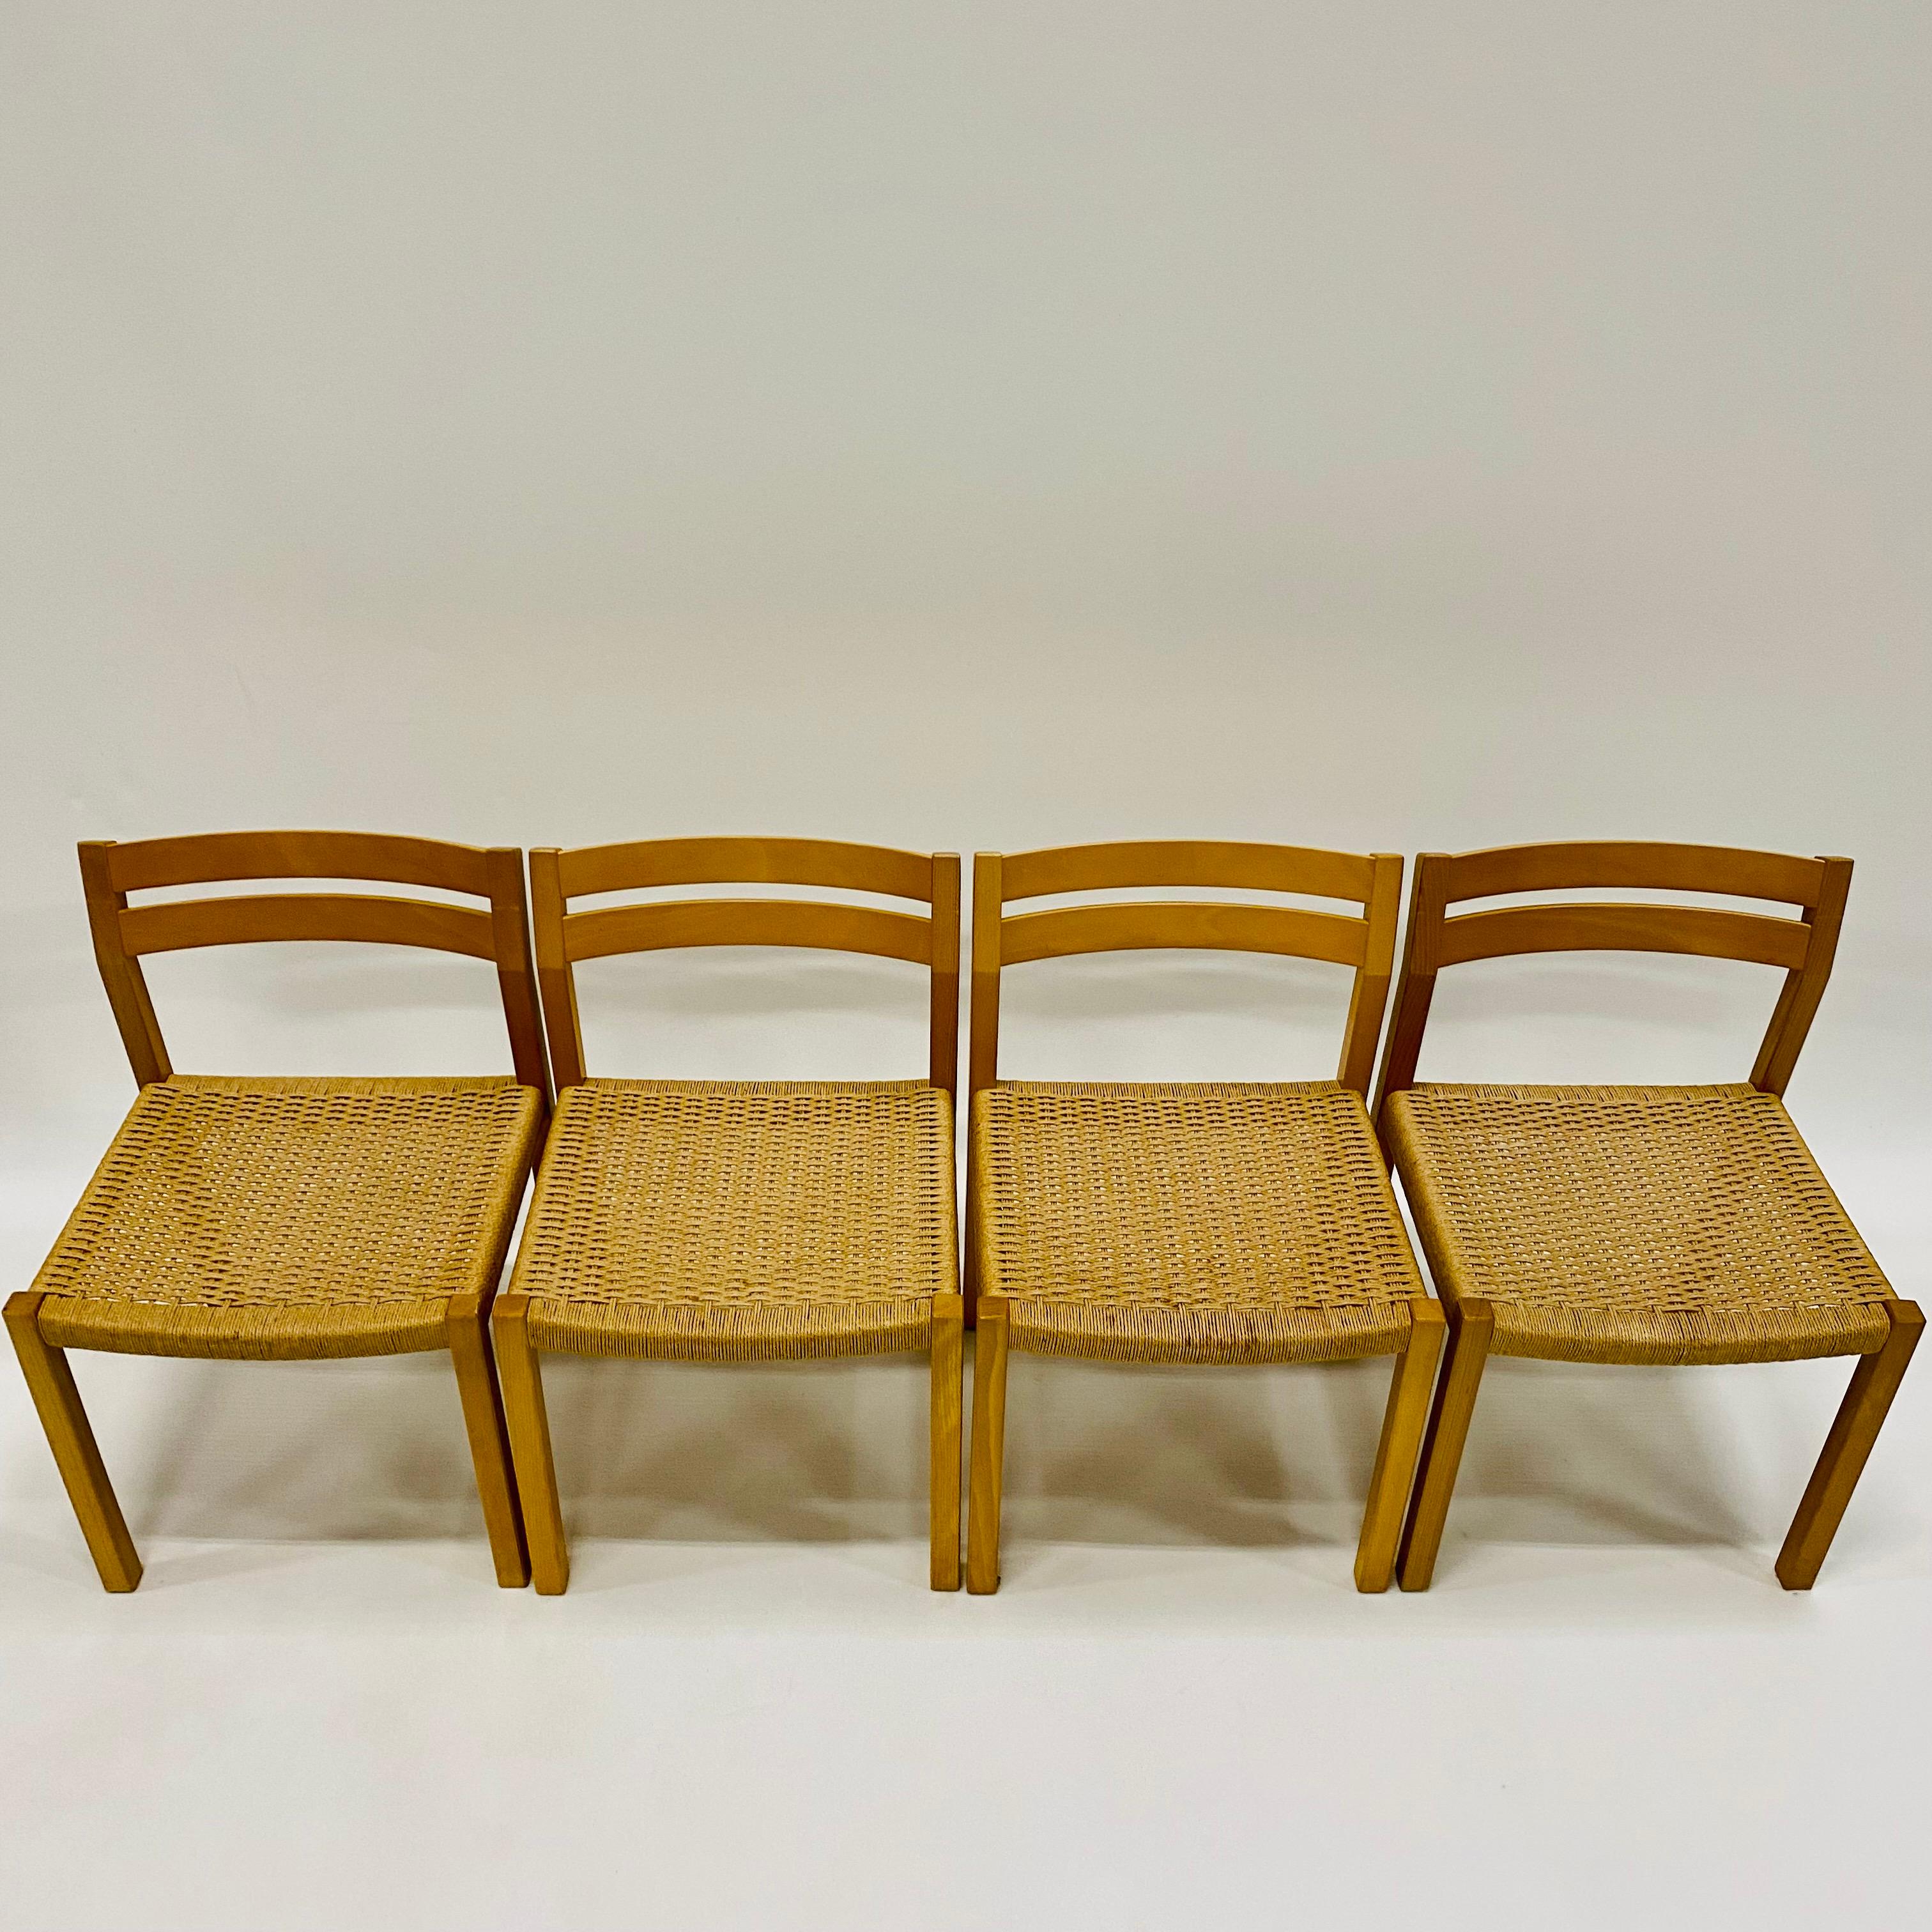 Danish 4 x J.L. Möller Papercord Dining Chairs by Niels O. Möller Denmark 1970 For Sale